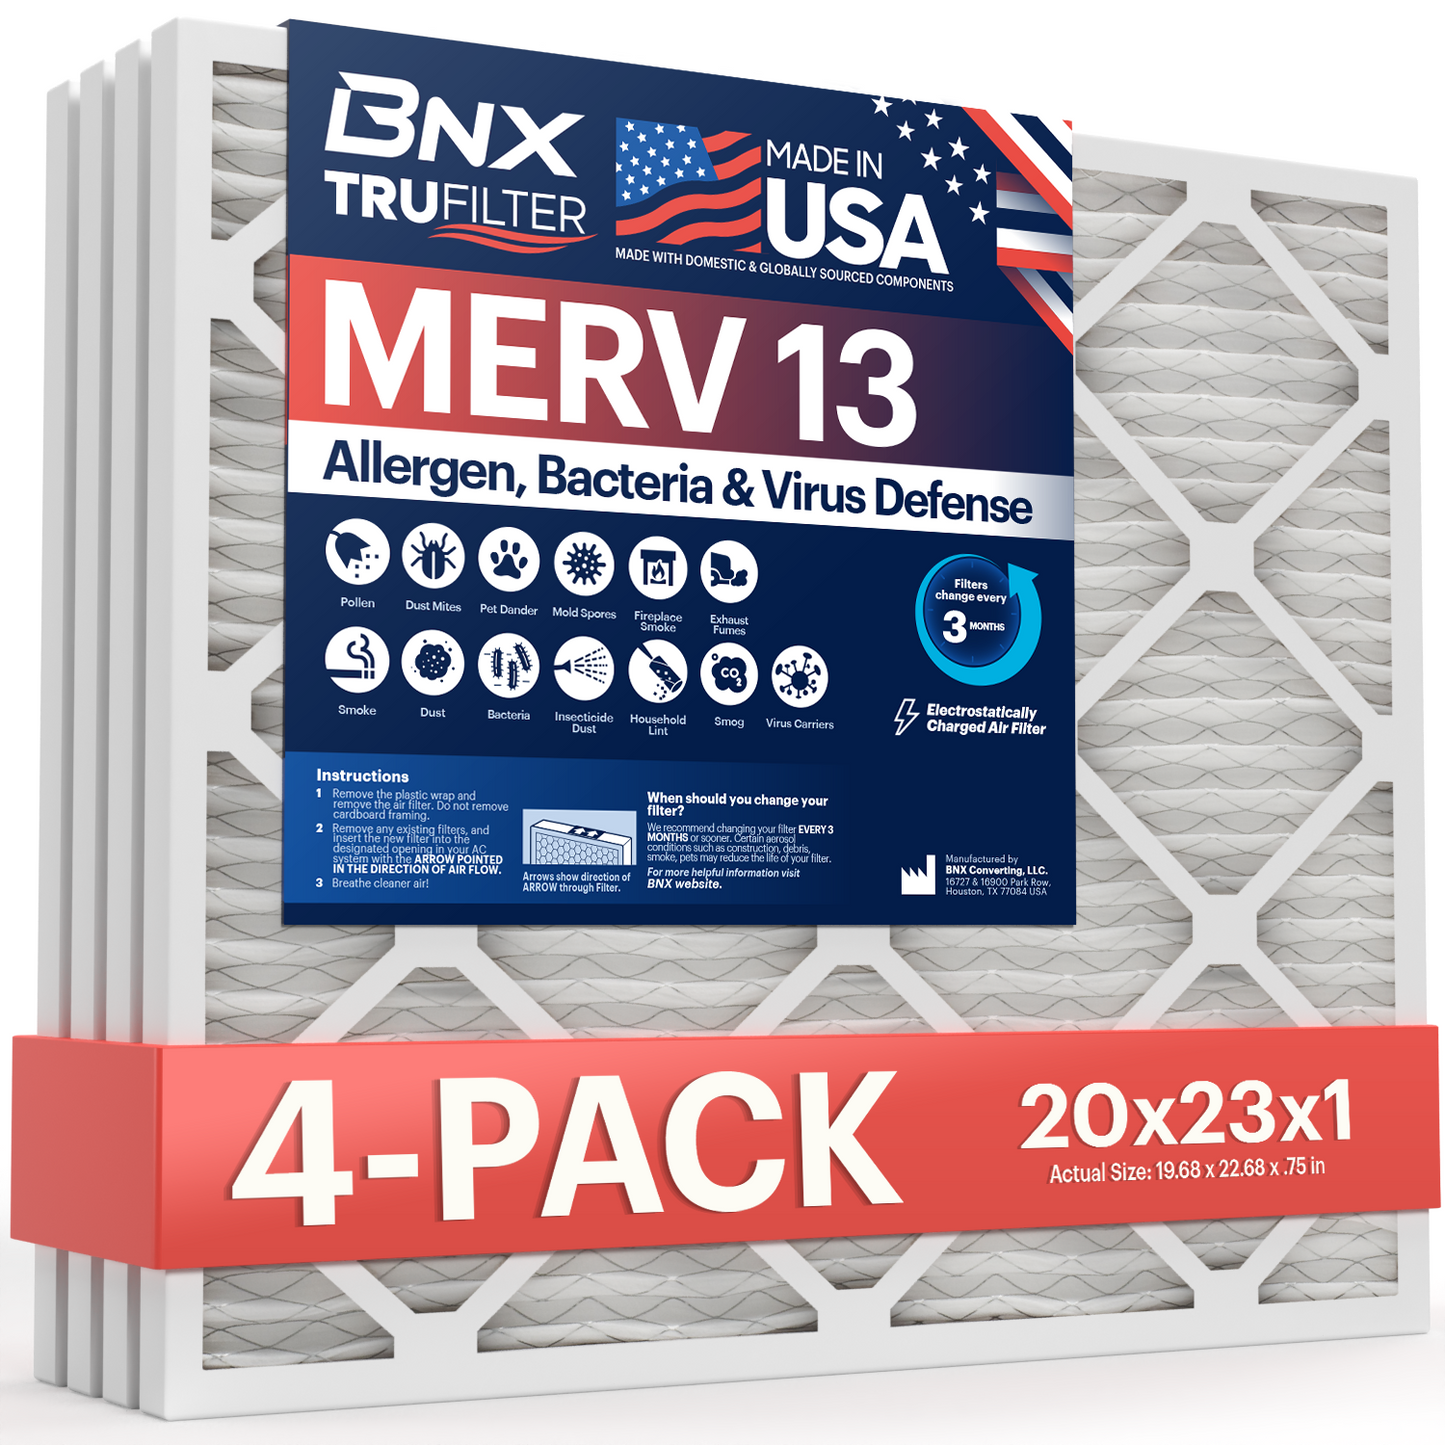 BNX TruFilter 20x23x1 MERV 13 Pleated Air Filter – Made in USA (4-Pack)